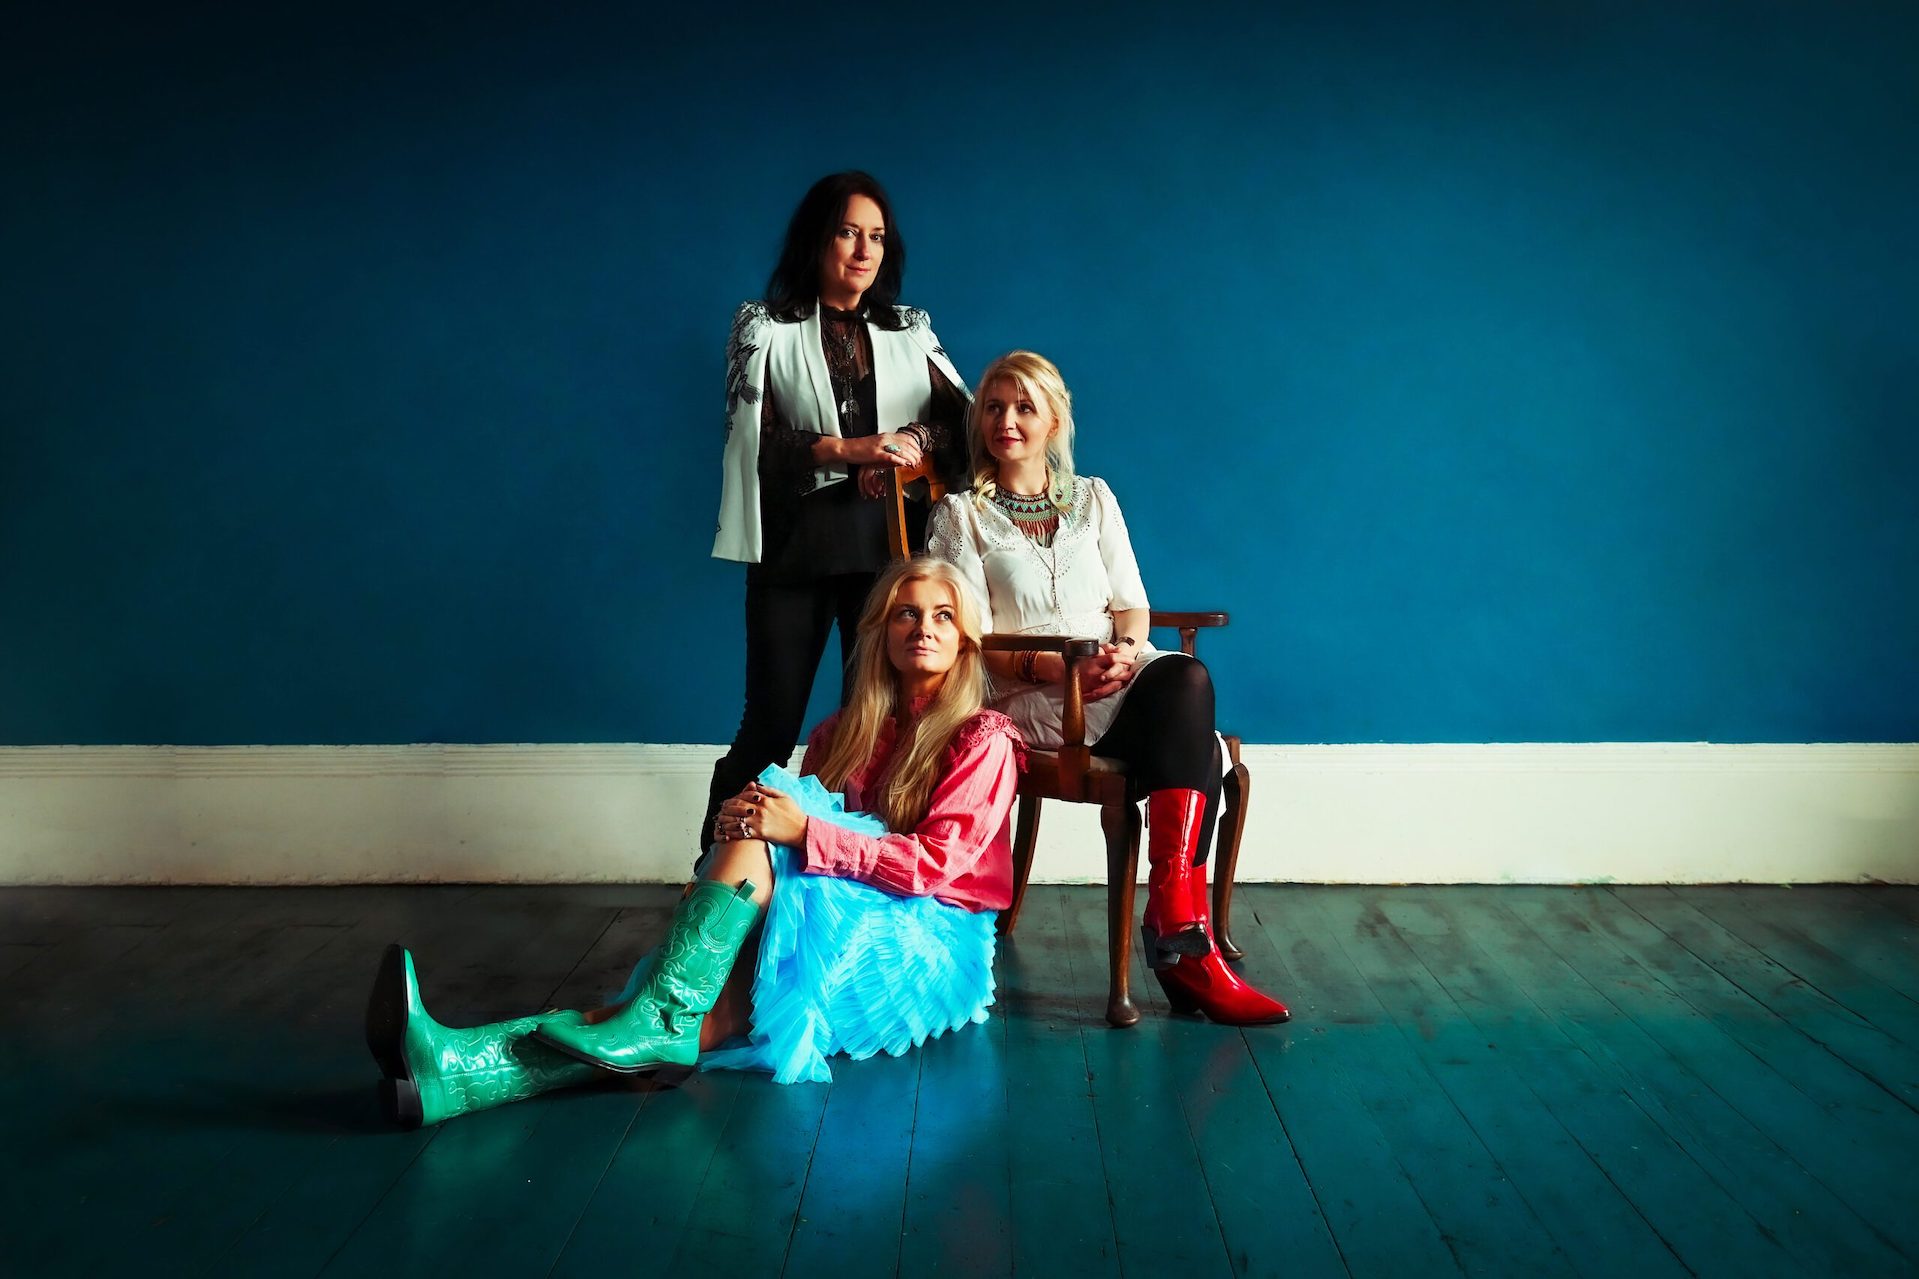 3 women, 1 standing, 1 seated in a wooden chair, 1 sat in front on a wooden floor, inside against dark blue wall.